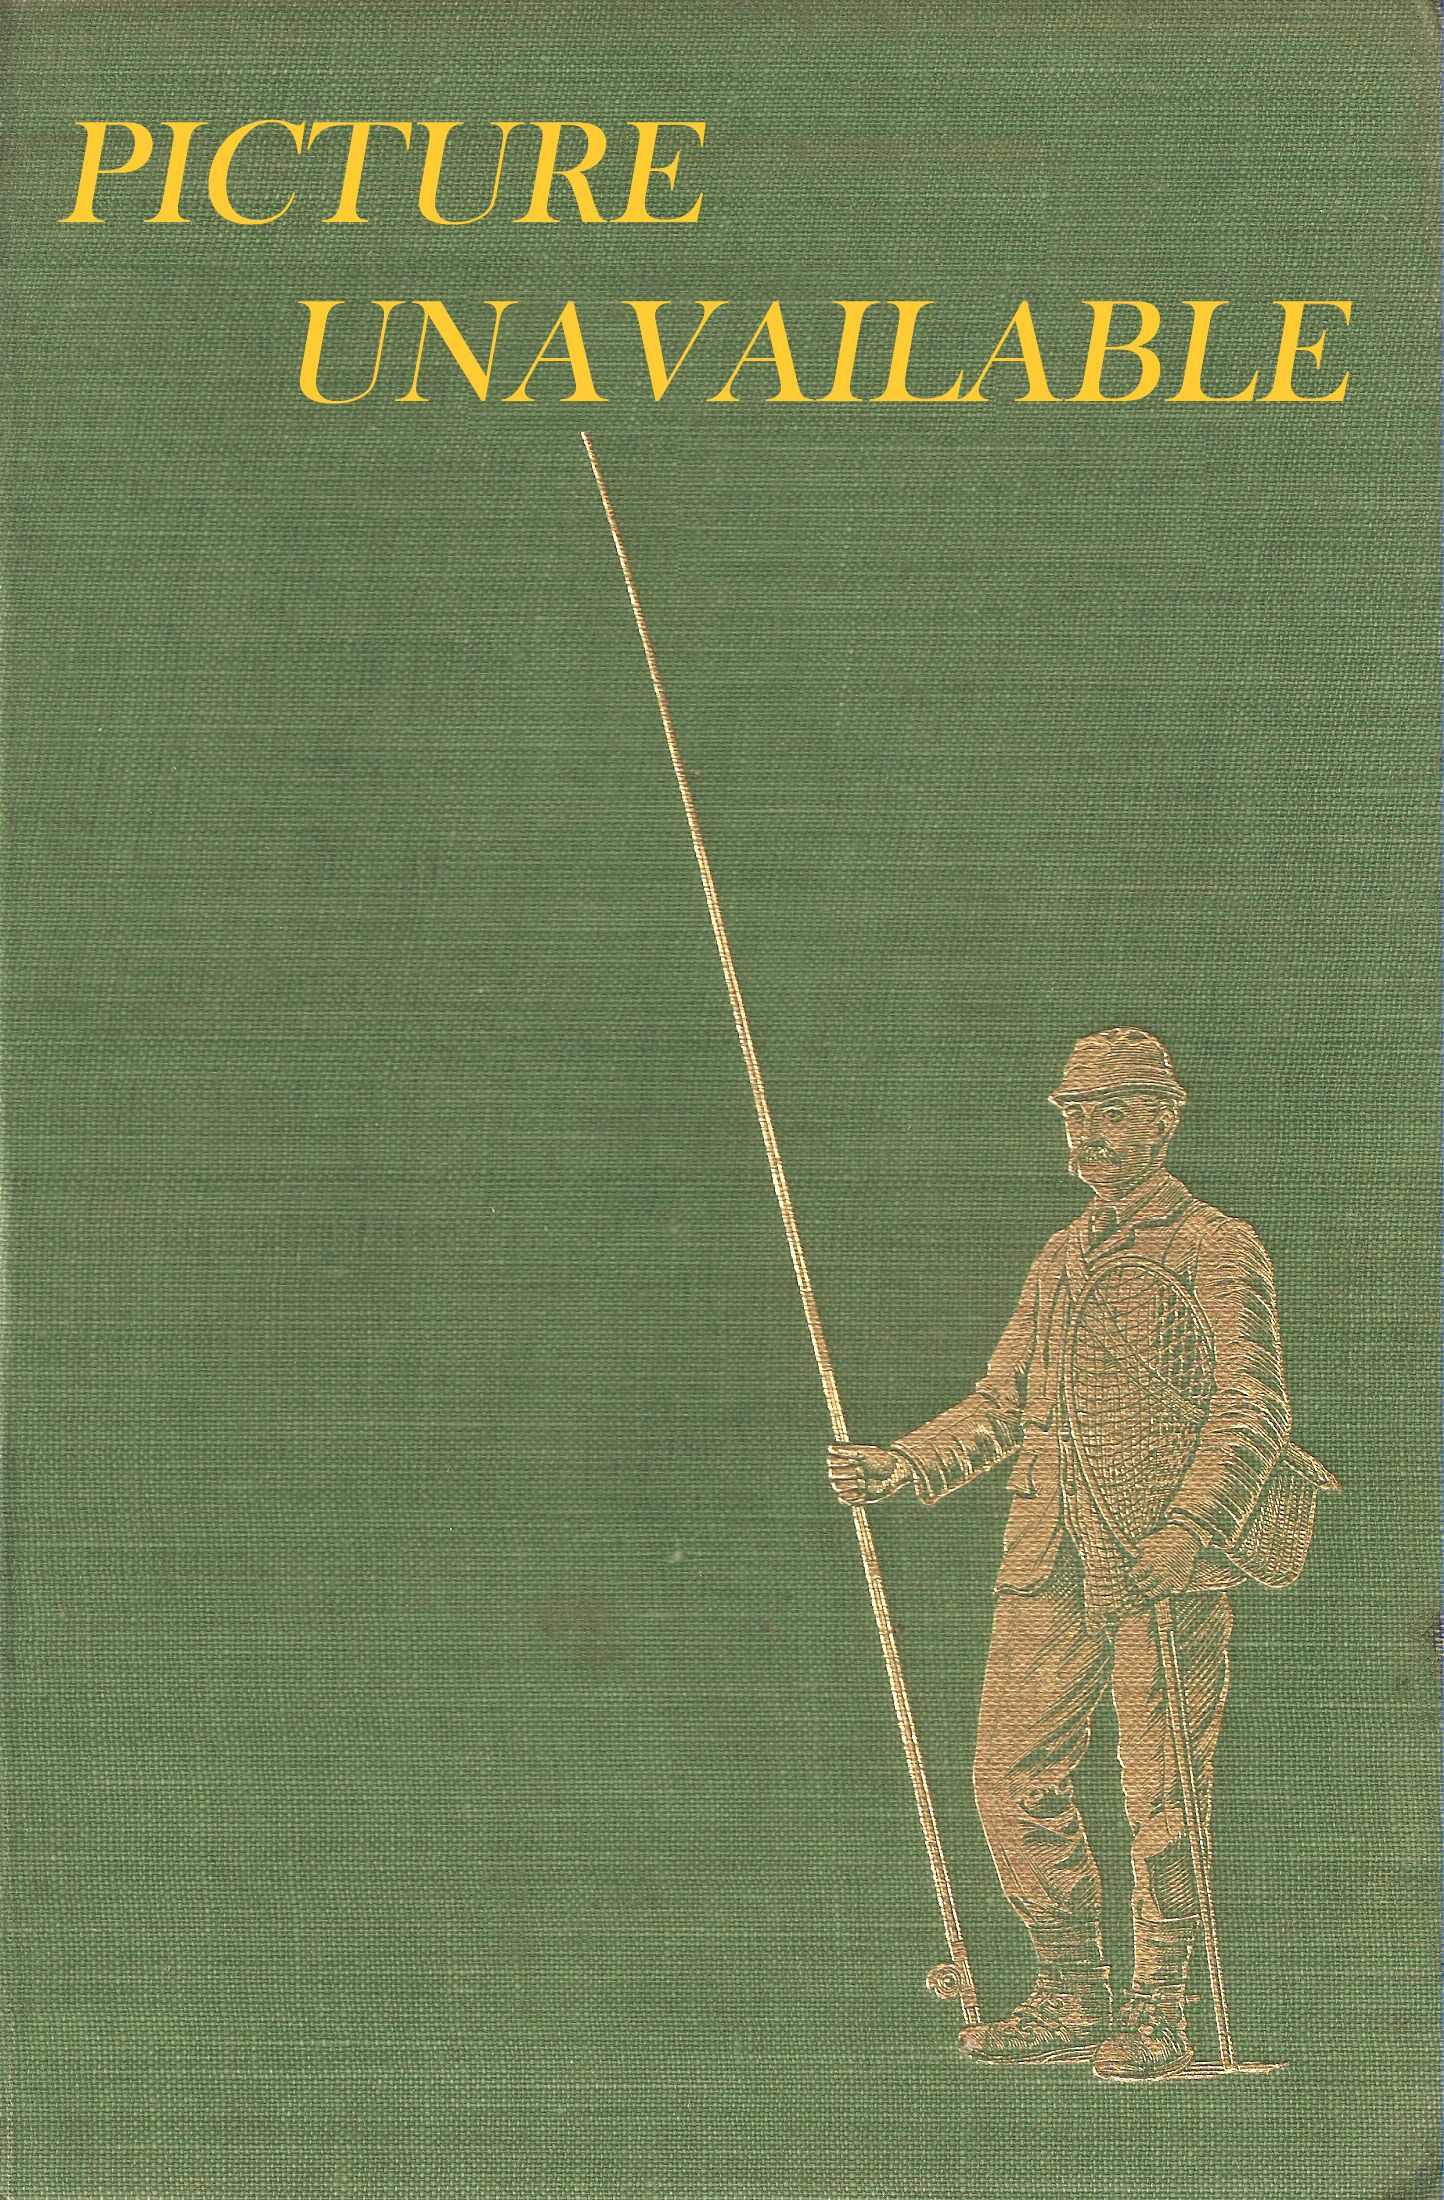 ANGLING: THE SOLITARY VICE. By Fred Buller.